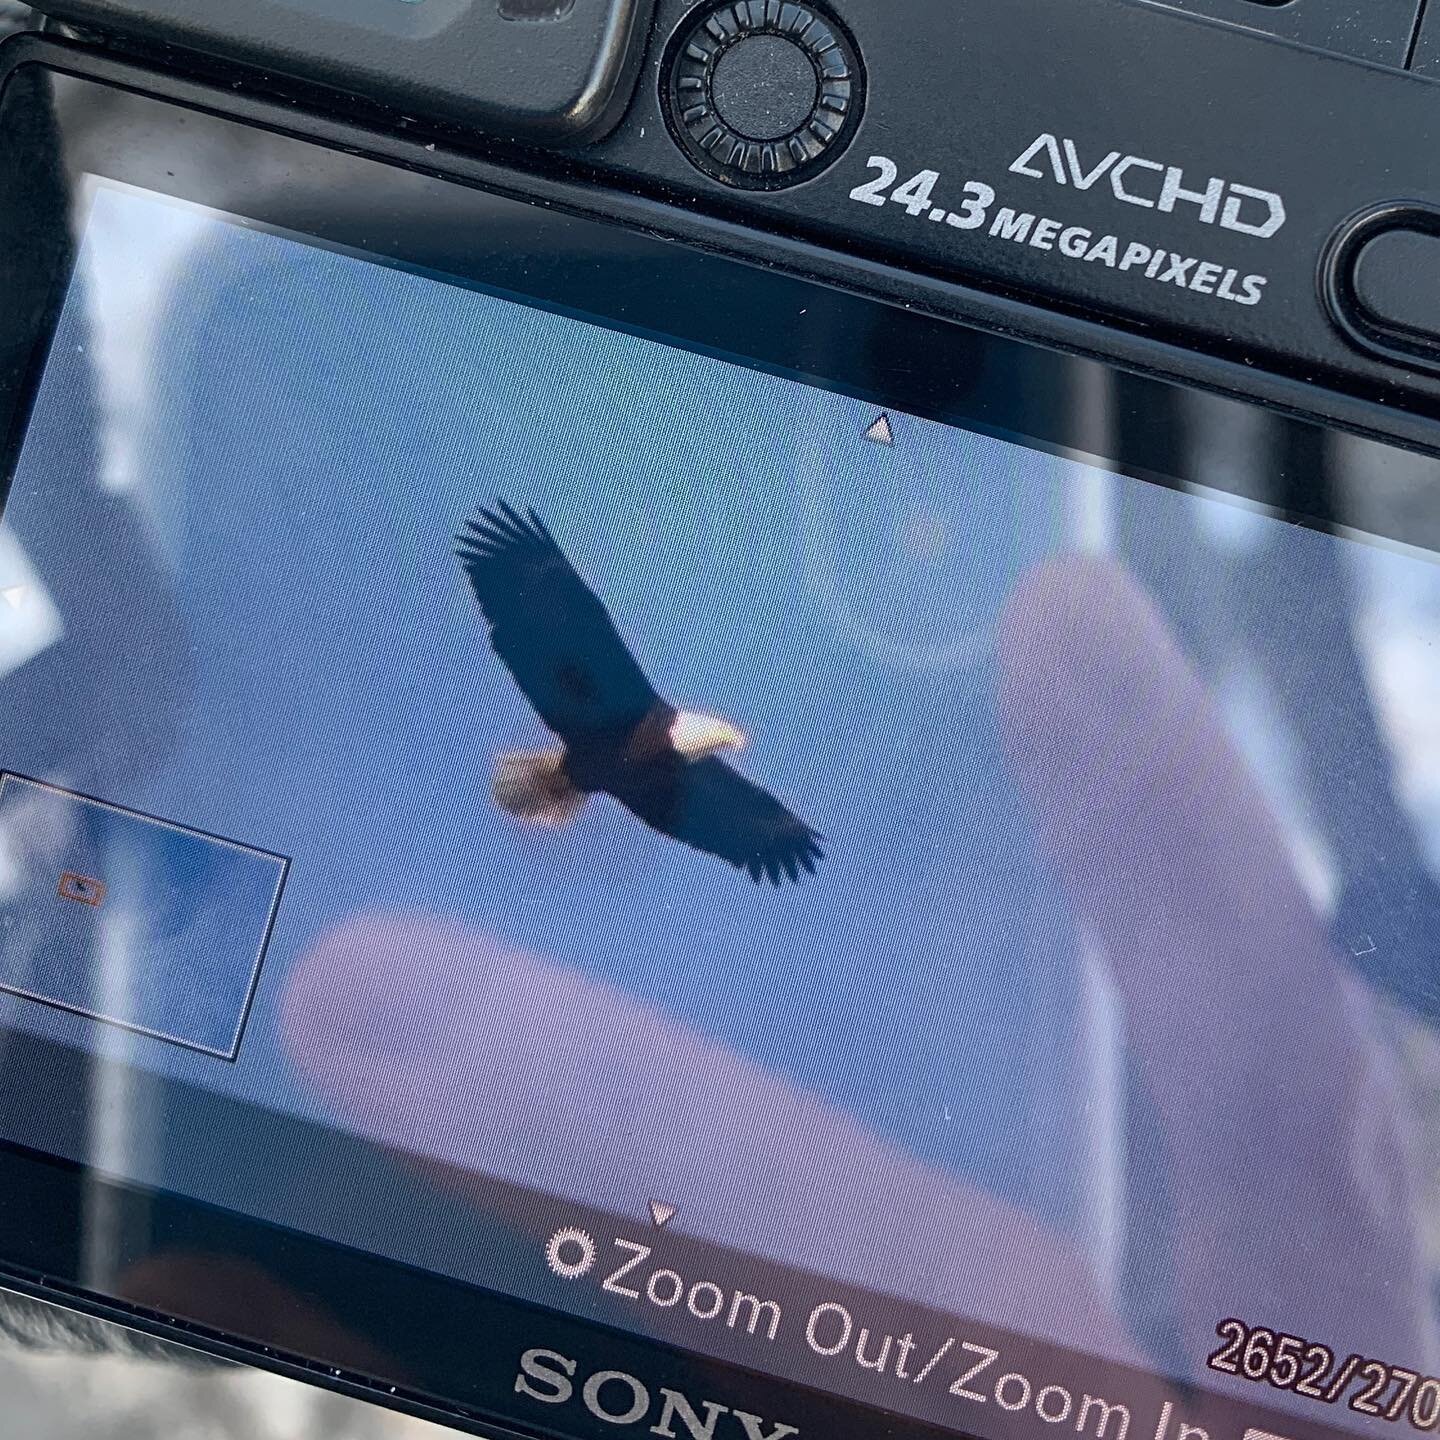 Still in shock that I spotted a bald eagle today, over Riverside Park/Drive around 111th street. I noticed a school of crows and then realized high above them was a BALD EAGLE. My zoom can only go so far, so a few photos of my camera screen (zoomed) 